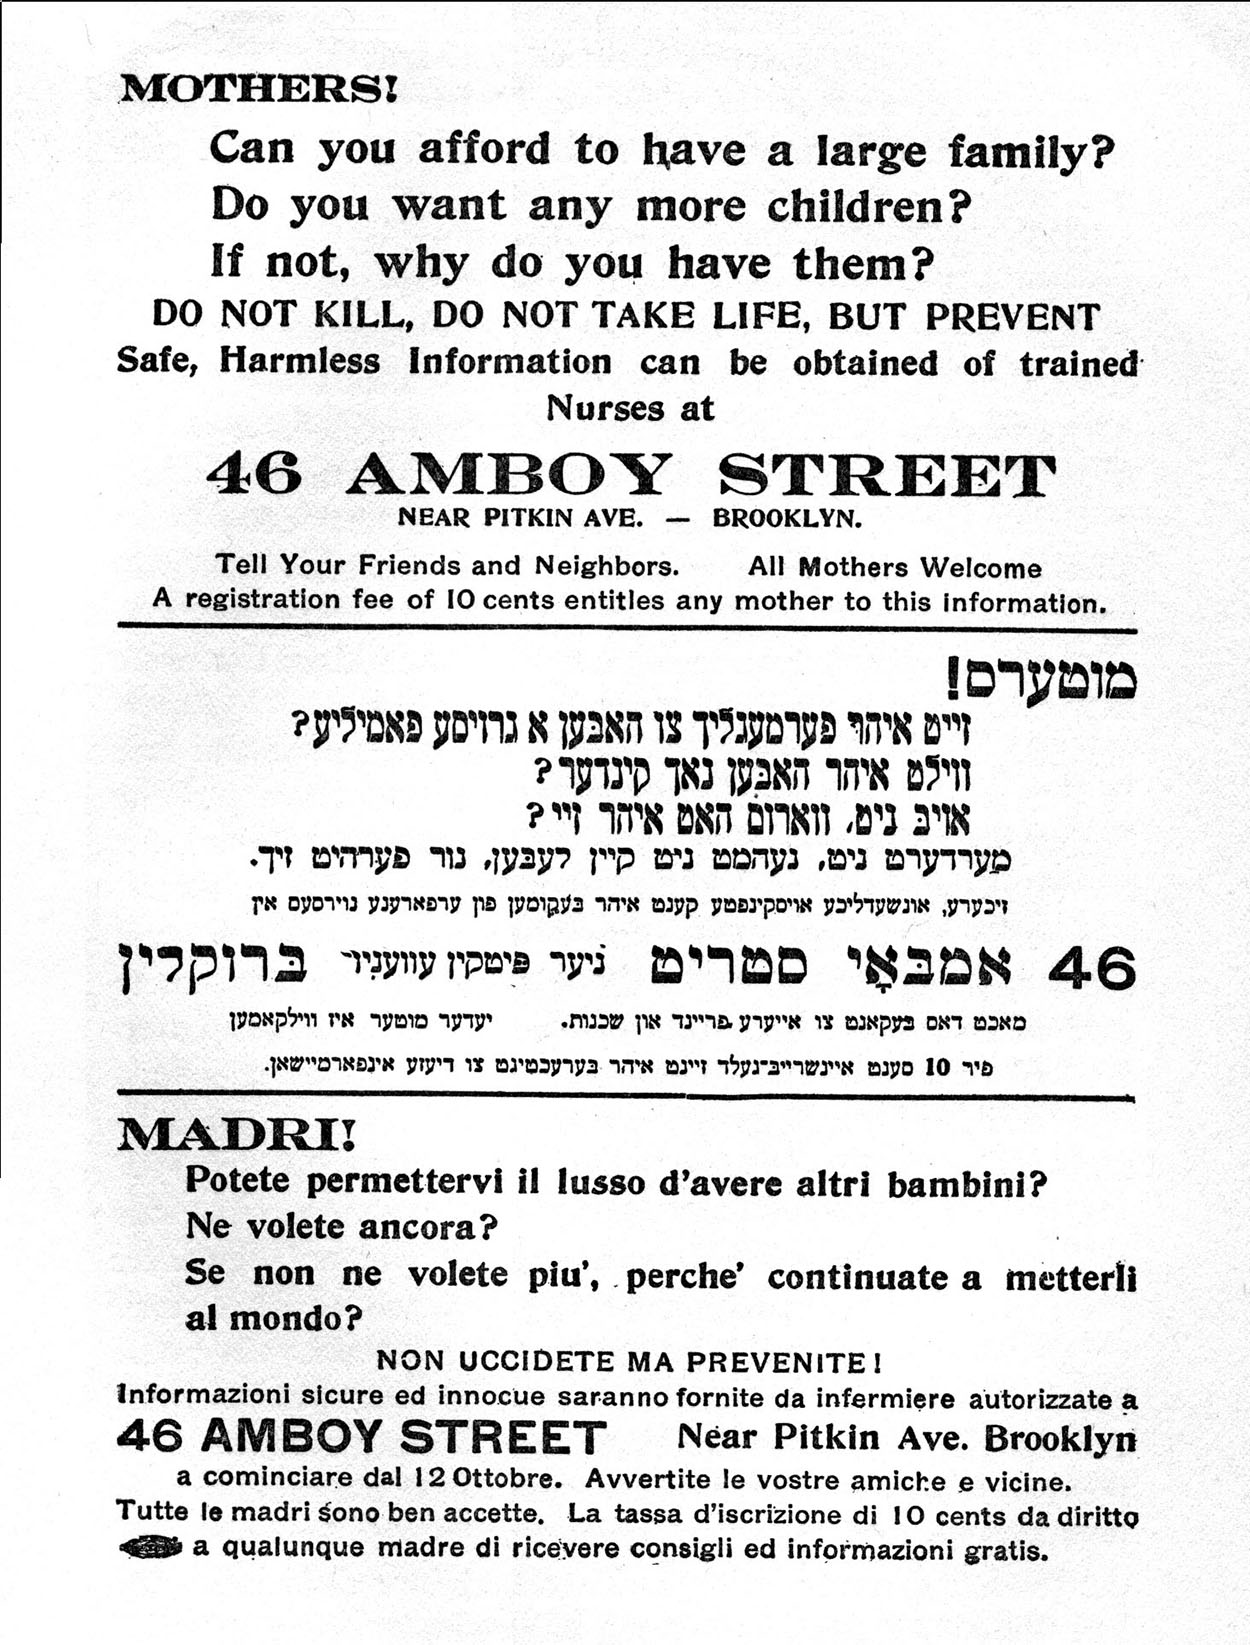 Flyer urging women to come to a clinic in Brooklyn to learn about reproductive education. Written in black lettering in English, Yiddish, and Italian.